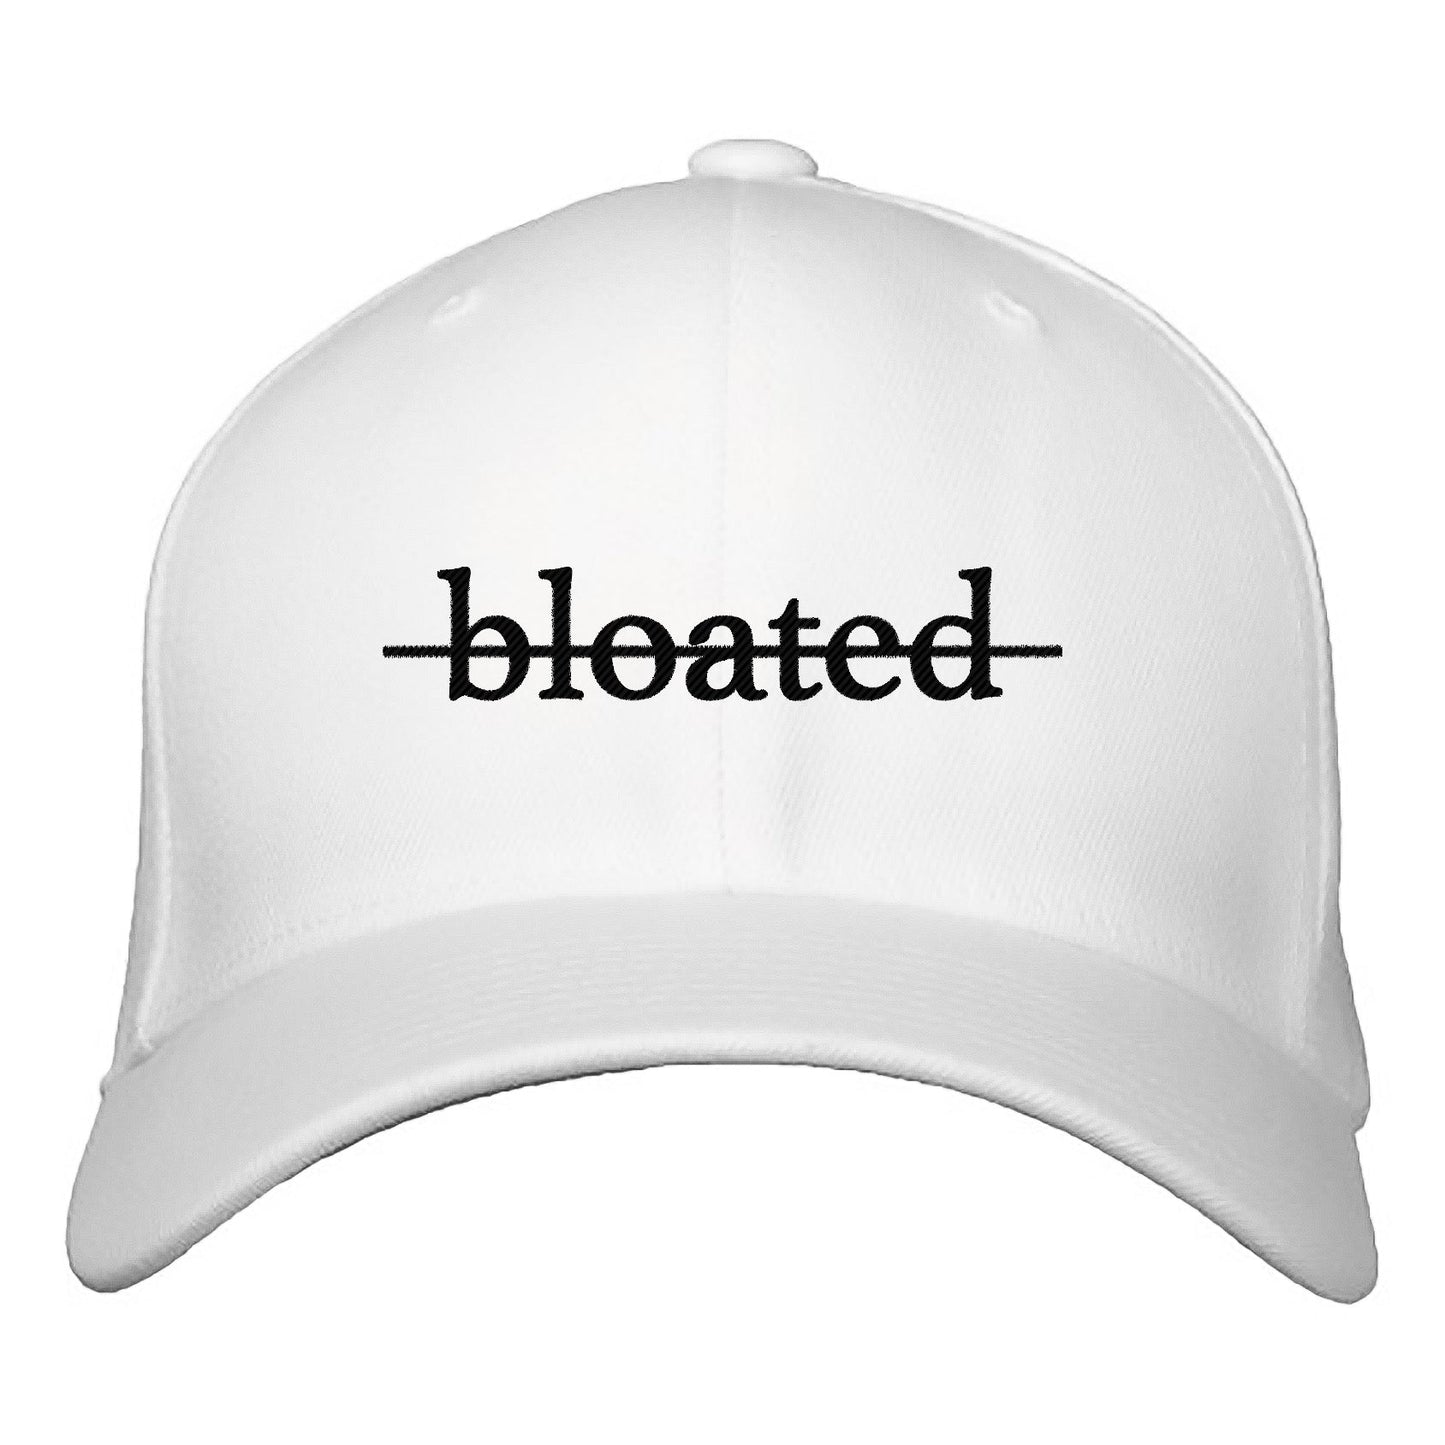 The Tox Bloated Hat